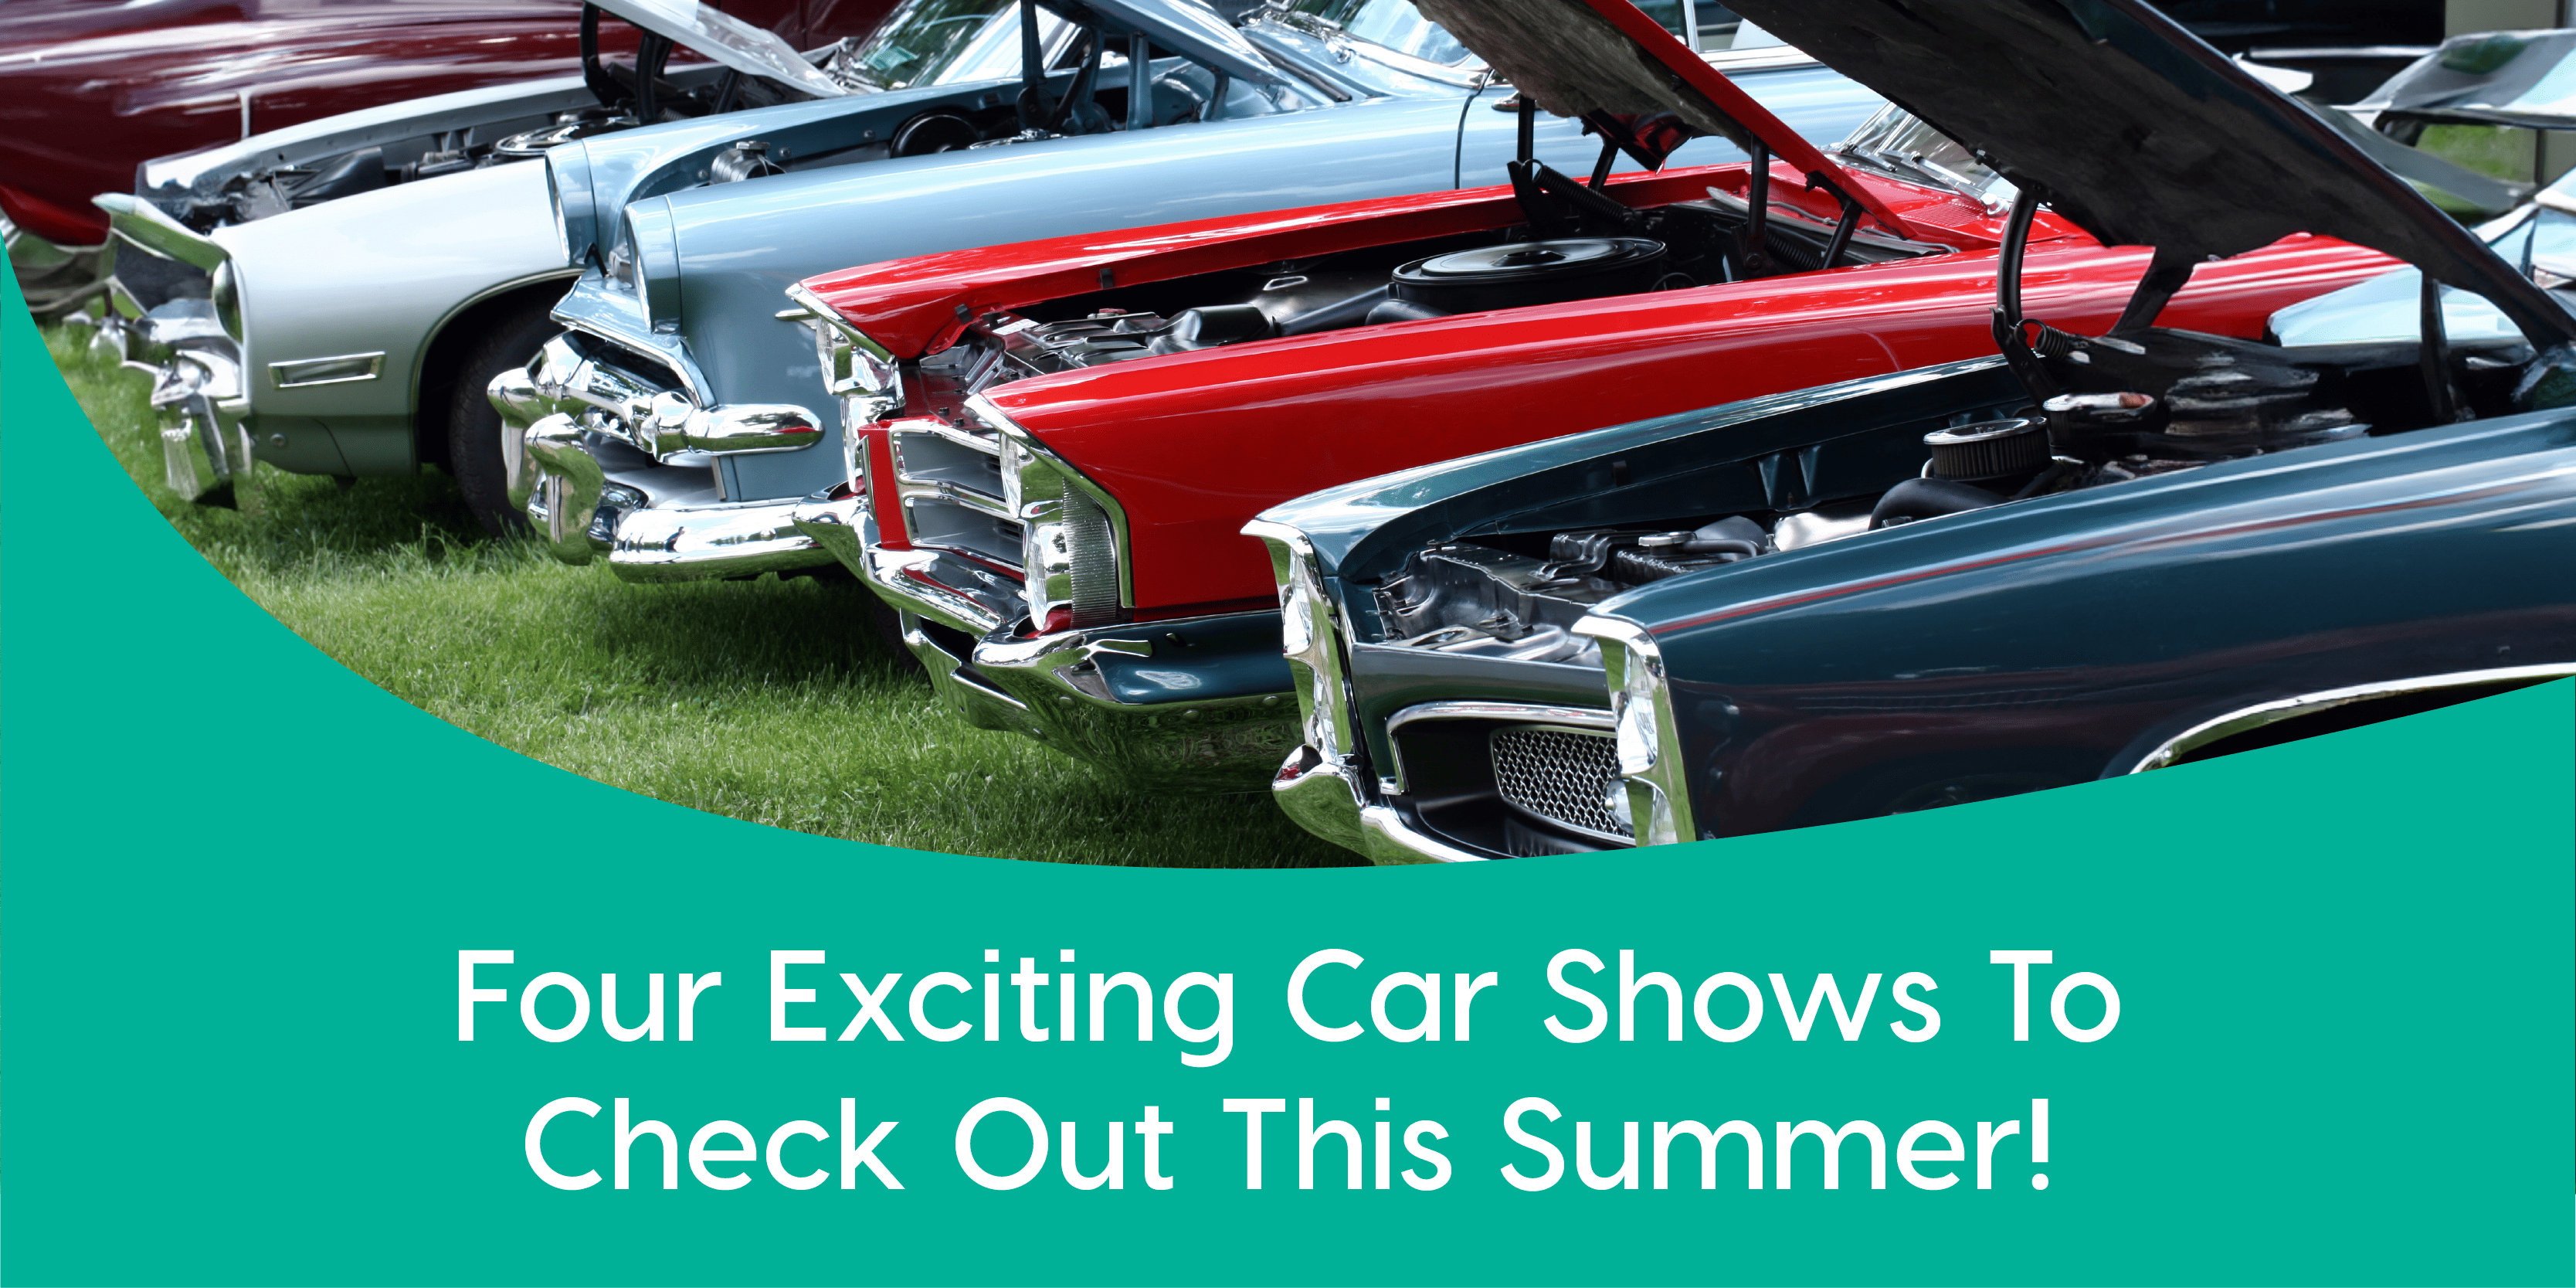 Four Exciting Car Shows To Check Out This Summer!